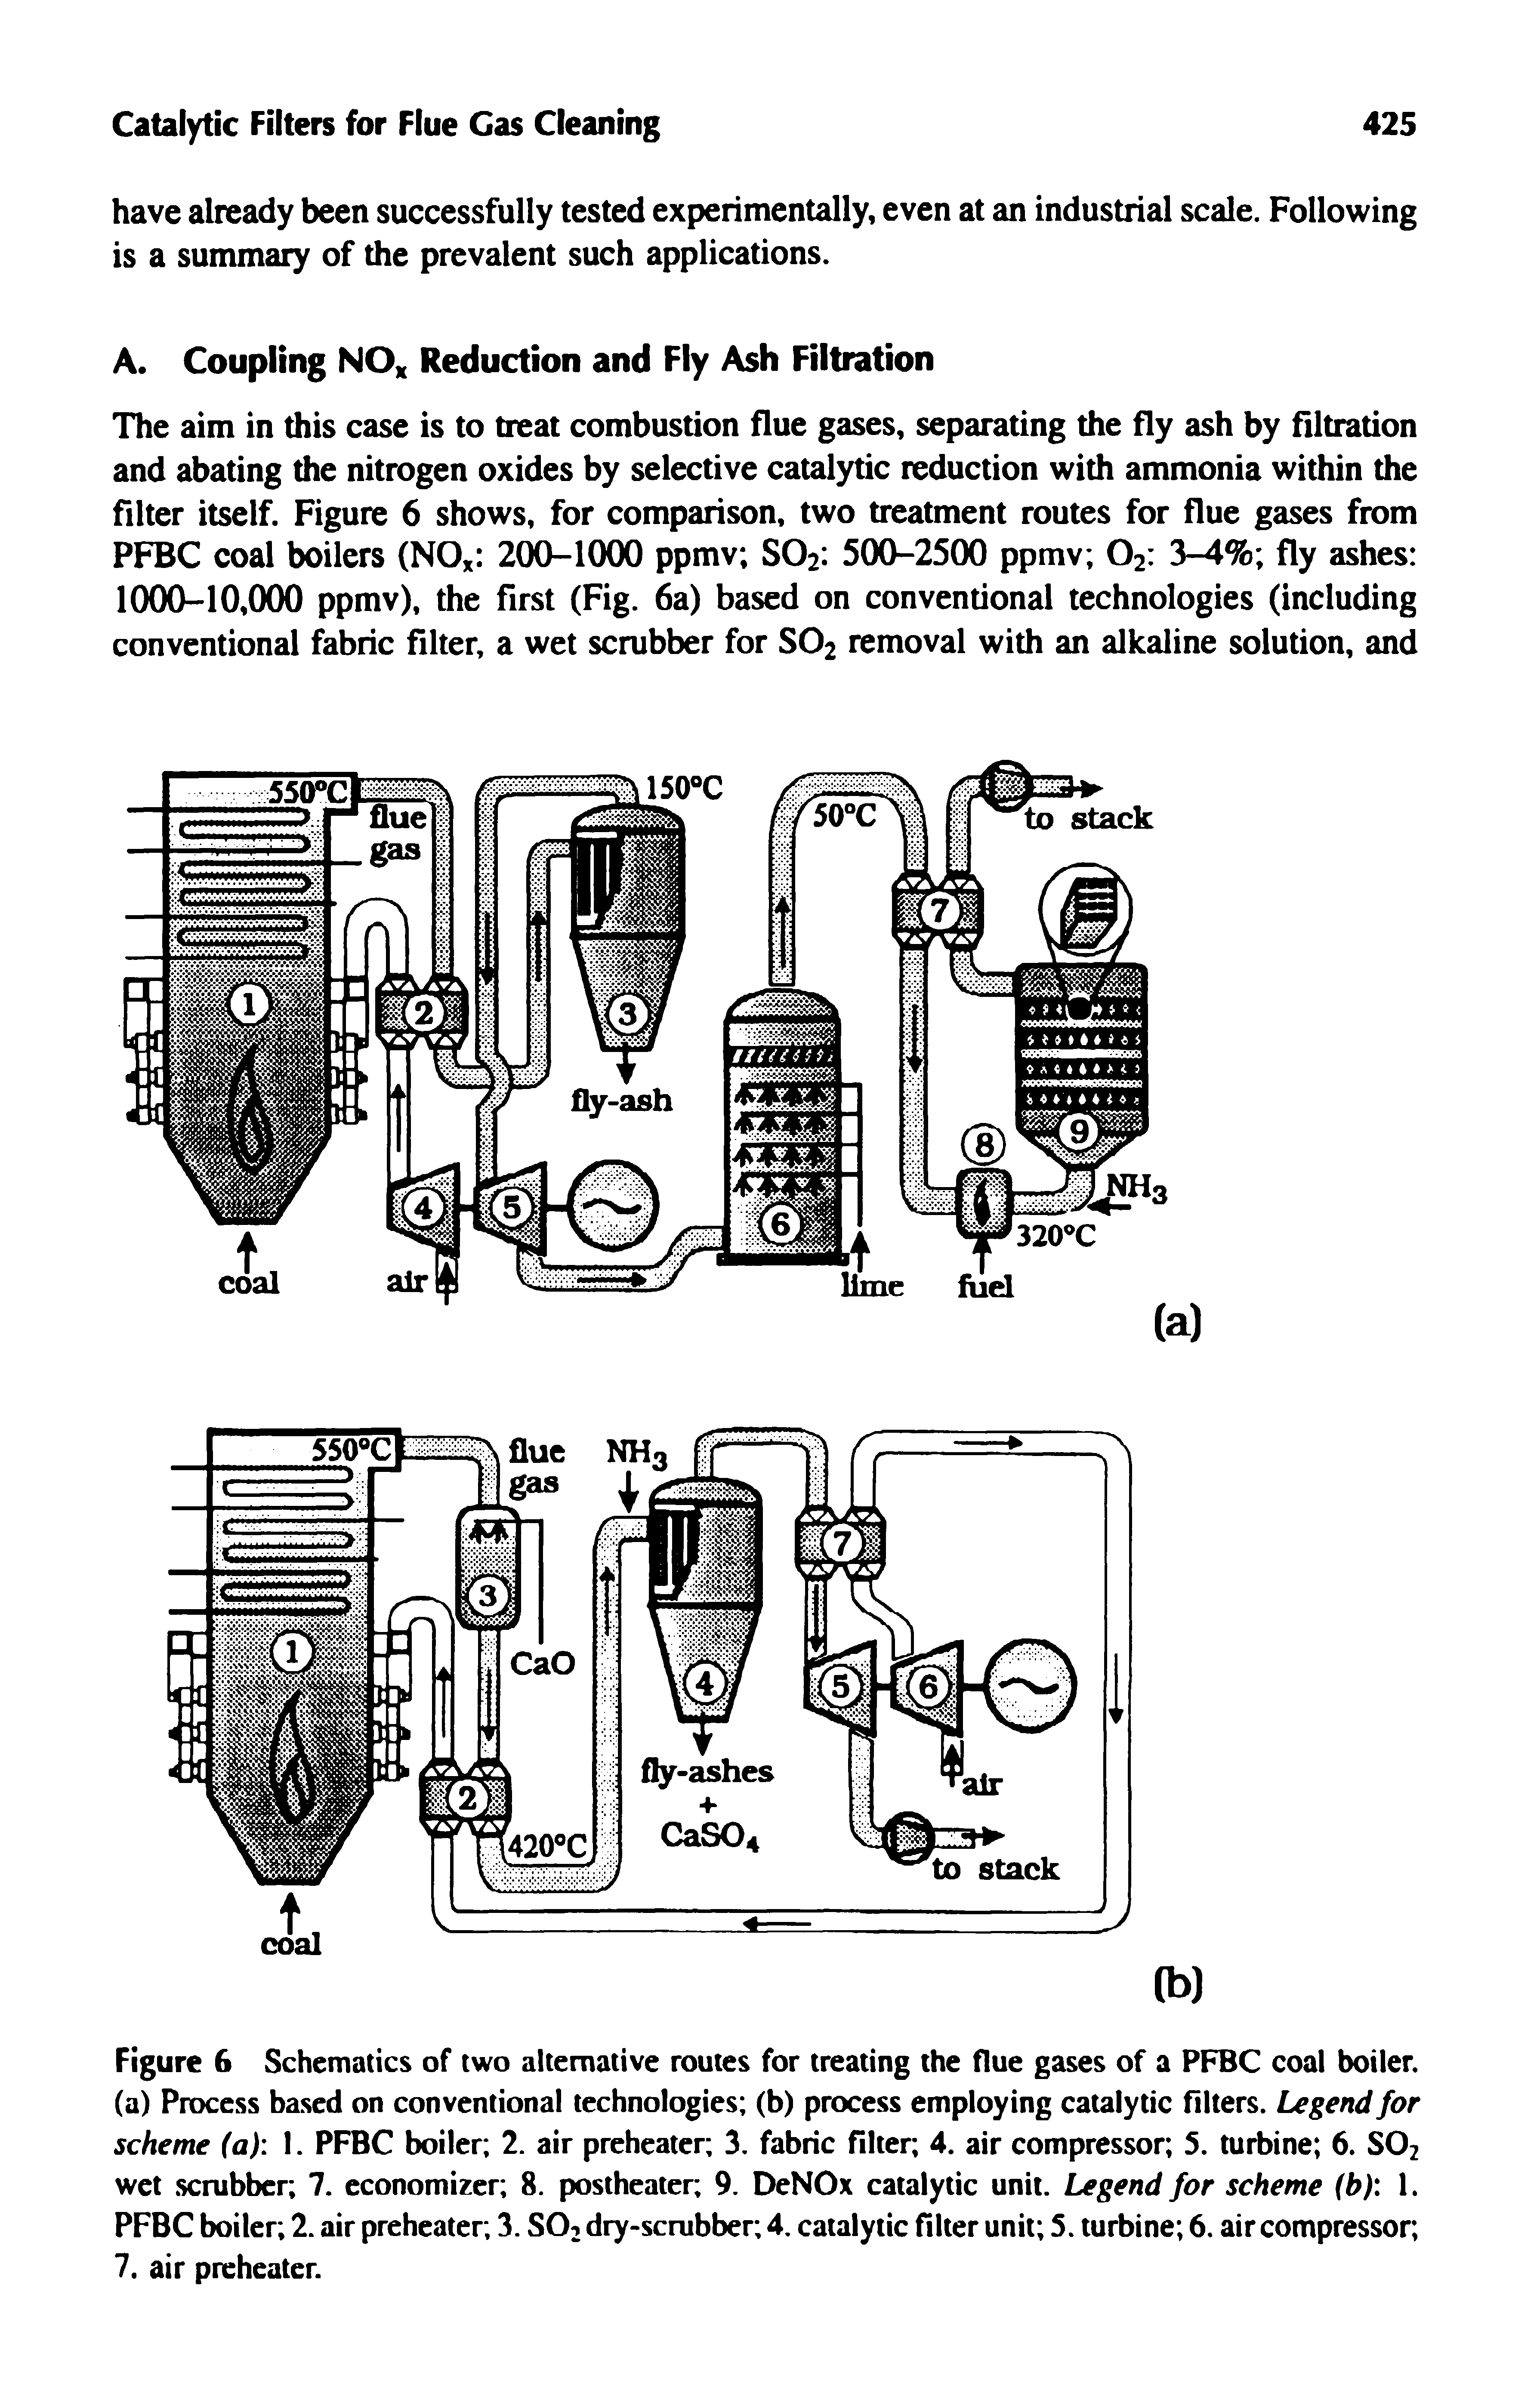 Figure 6 Schematics of two alternative routes for treating the flue gases of a PFBC coal boiler, (a) Process based on conventional technologies (b) process employing catalytic filters. Legend for scheme (a) I. PFBC boiler 2. air preheater 3. fabric filter 4. air compressor 5. turbine 6. SO2 wet scrubber 7. economizer 8. postheater 9. DeNOx catalytic unit. Legend for scheme (b) 1. PFBC boiler 2. air preheater 3. SOi dry-scrubber 4. catalytic filter unit 5. turbine 6. air compressor 7. air preheater.